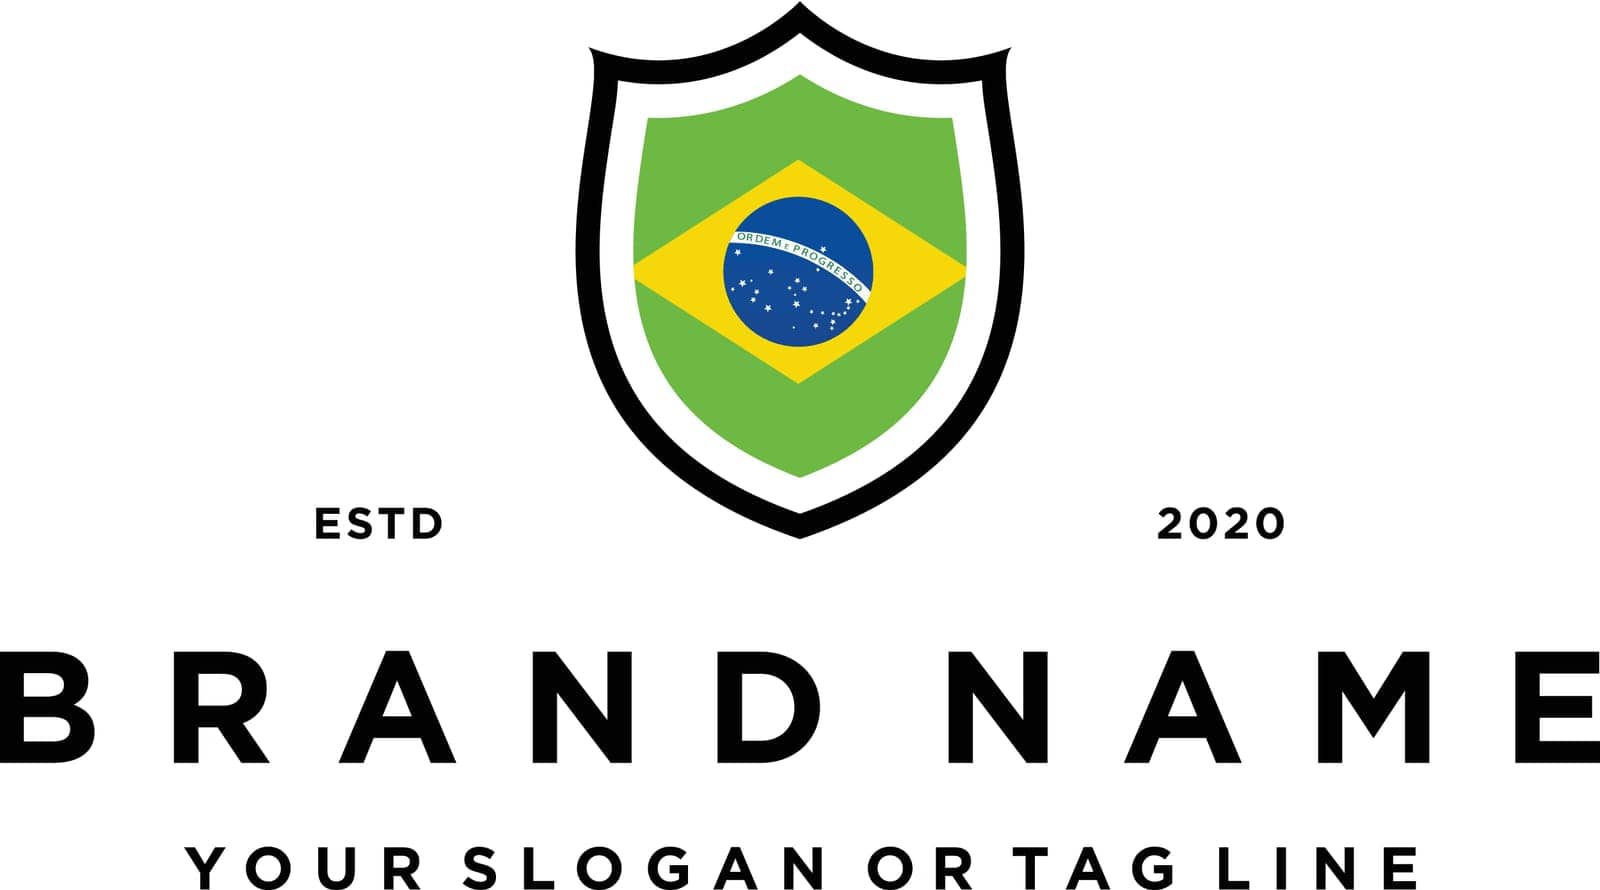 country,symbol,nation,sign,cover,presentation,championship,logo,international,decoration,emblem,element,ribbon,badge,winner,background,poster,card,champion,template,shield,game,flag,brazil,idea,book,icon,yellow,tournament,modern,design,national,vector,graphic,soccer,art,green,star,business,match,banner,label,abstract,team,football,blue,elements,illustration,sport